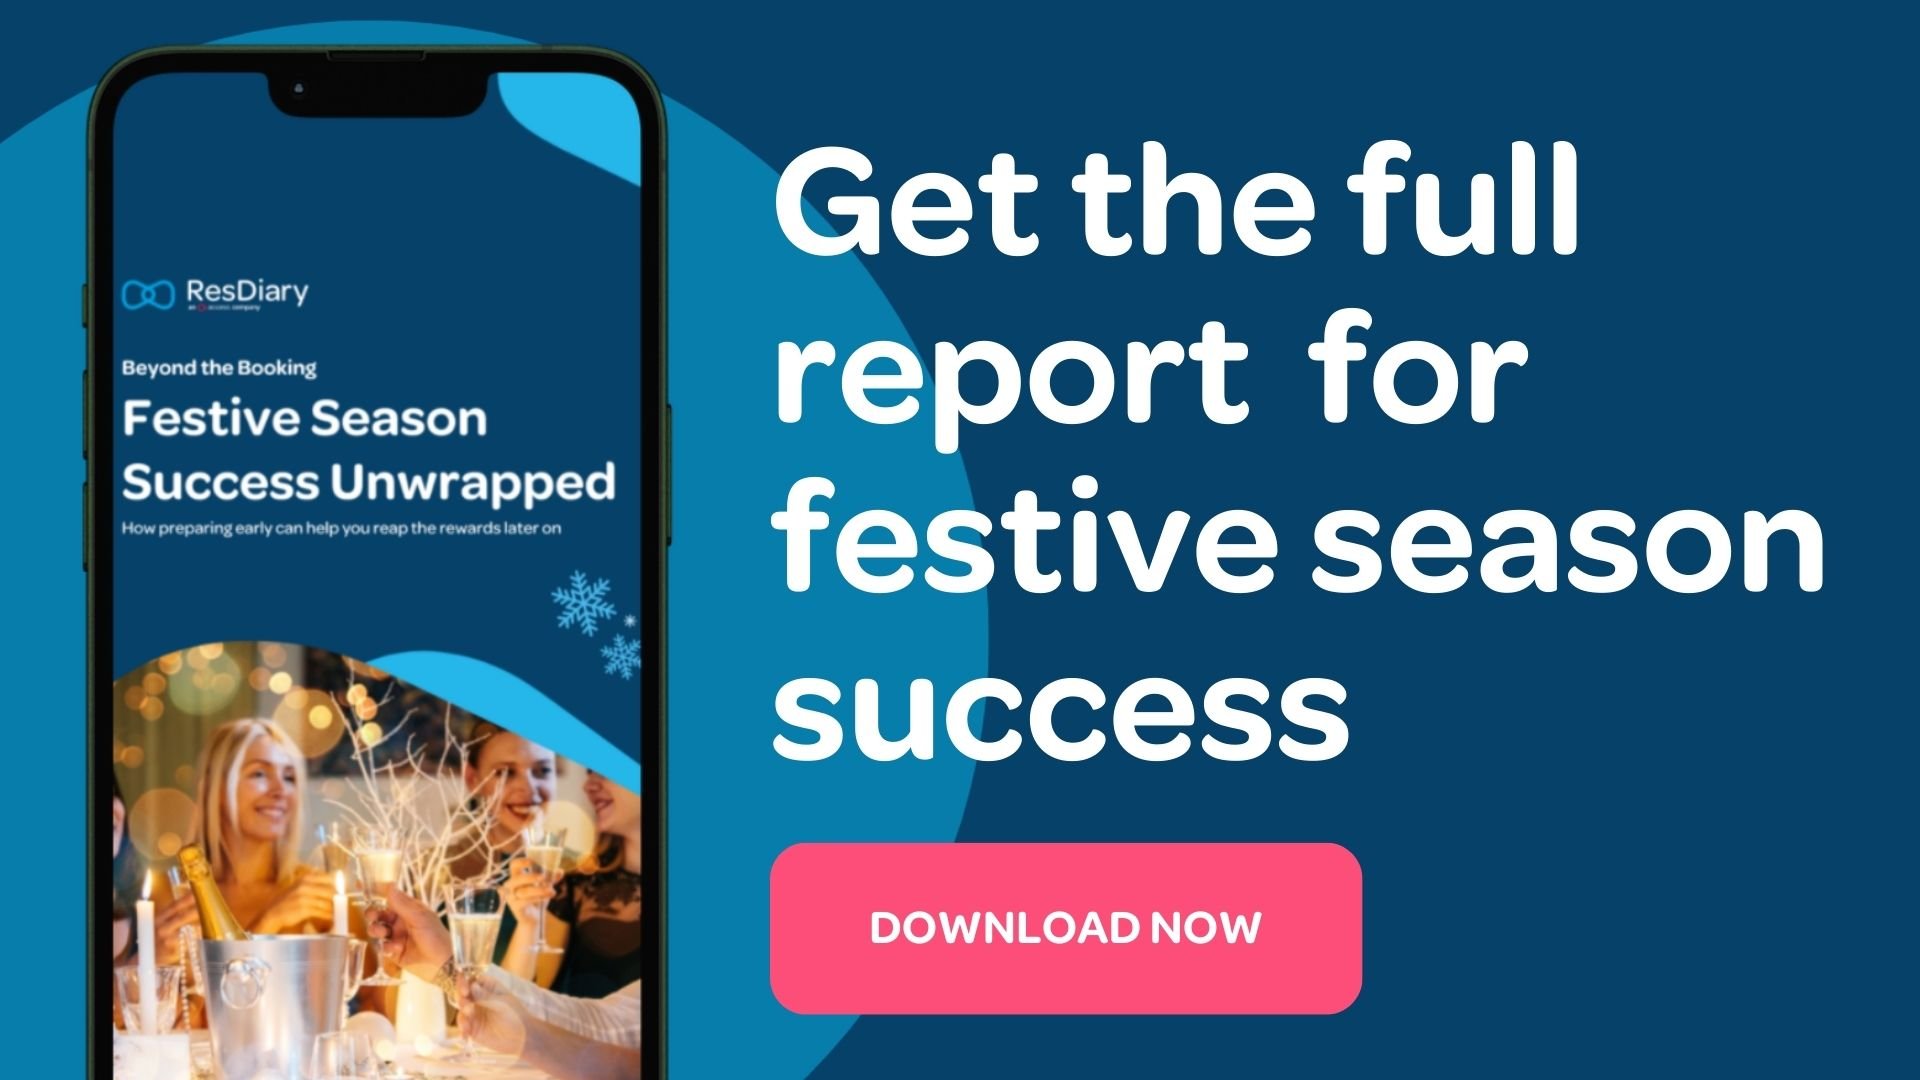 Call to action to download the full festive season hospitality industry report from ResDiary